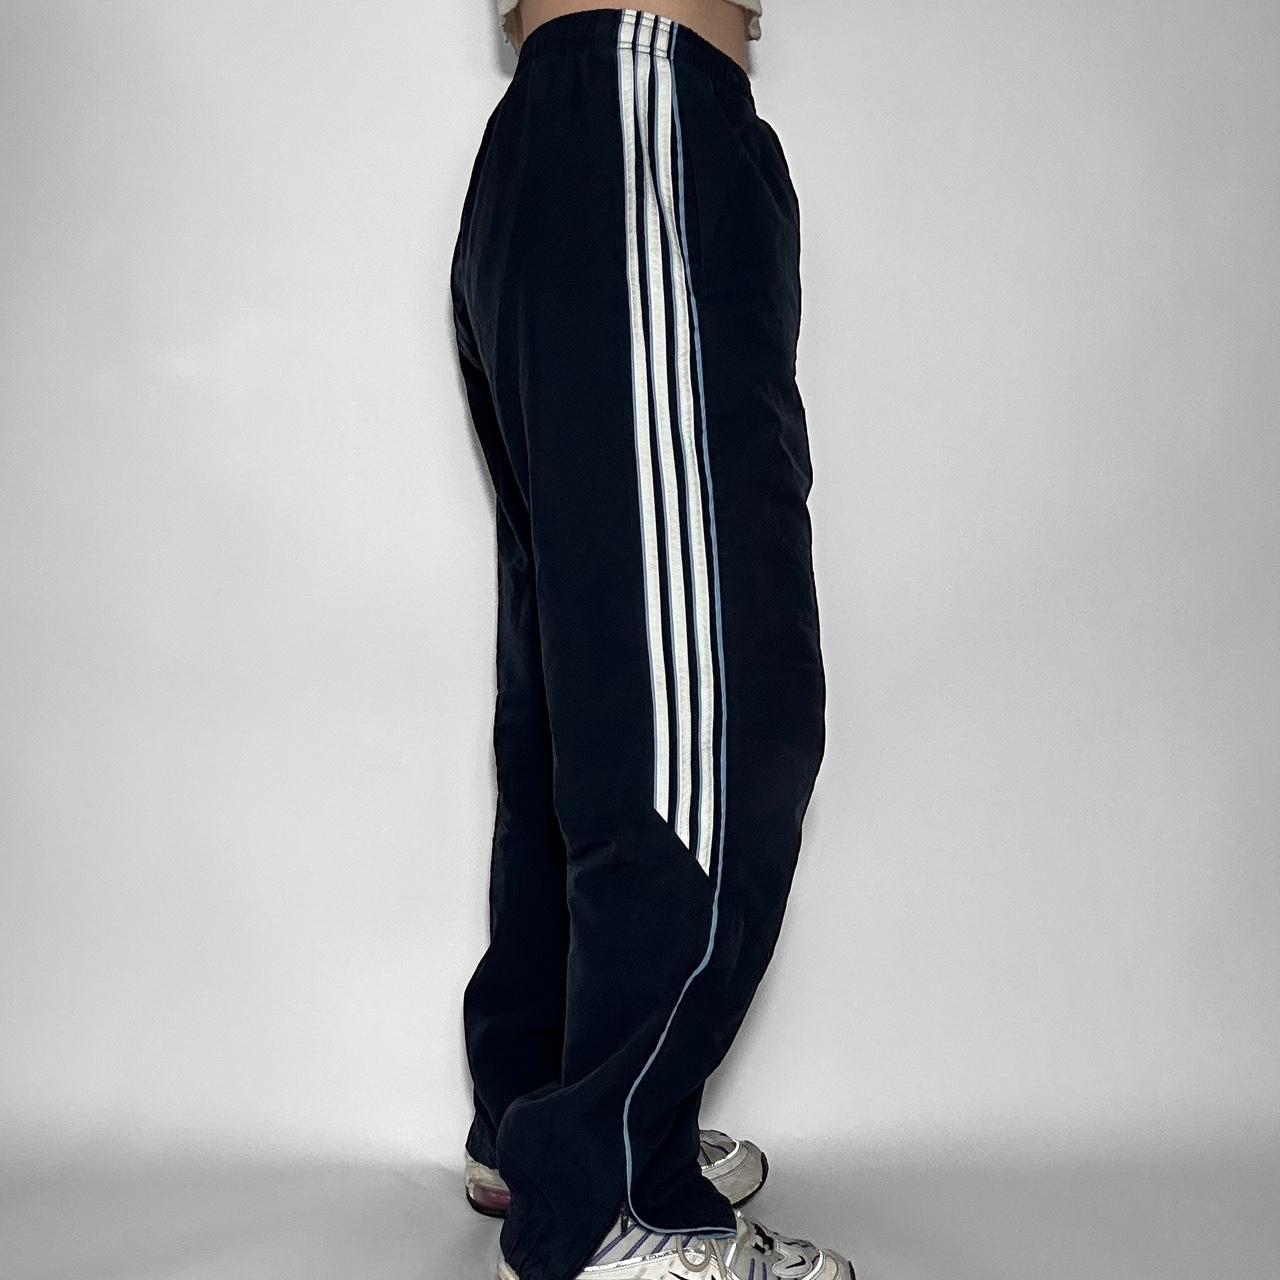 Vintage adidas trackpants - BGS CONSIGNMENT